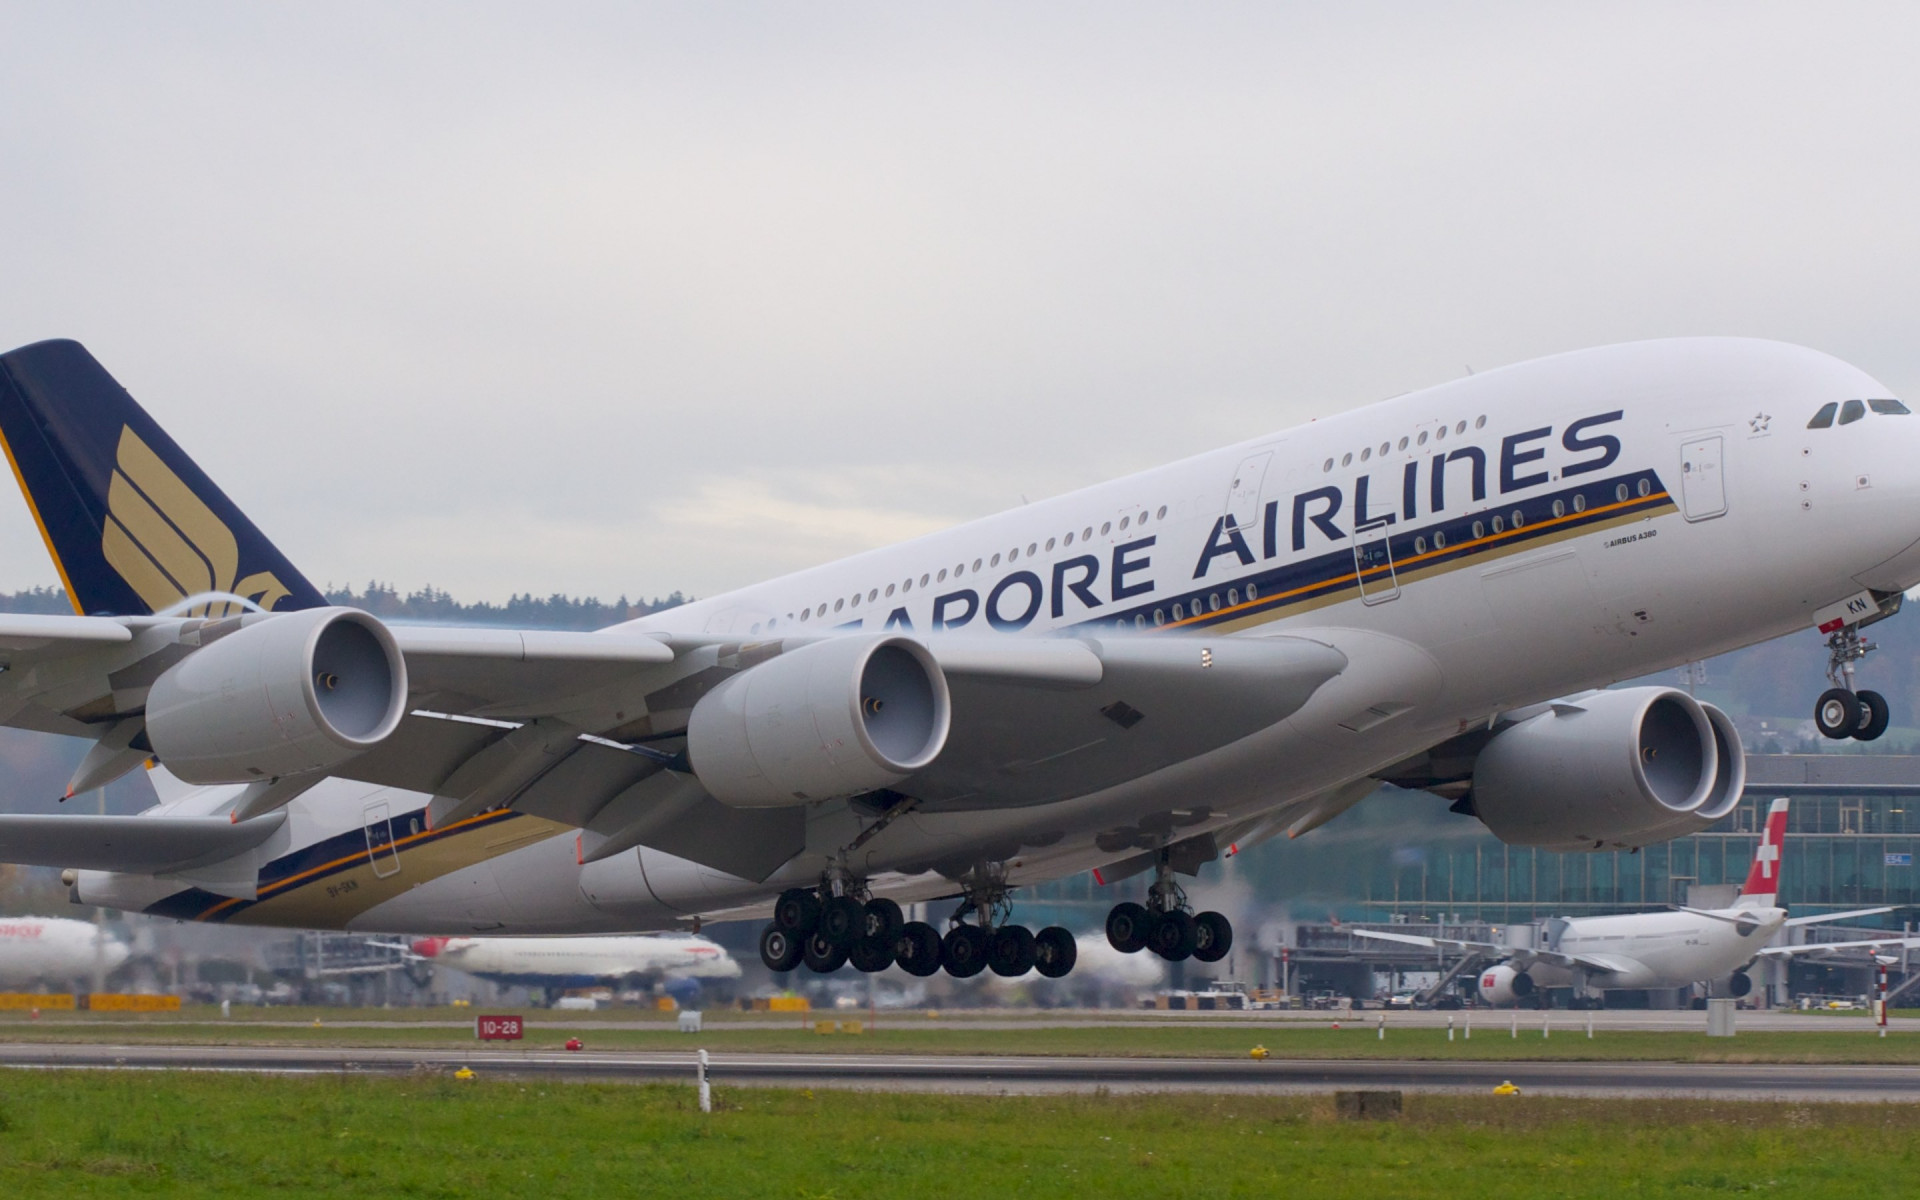 Passenger airplane from Singapore airlines wallpaper 1920x1200